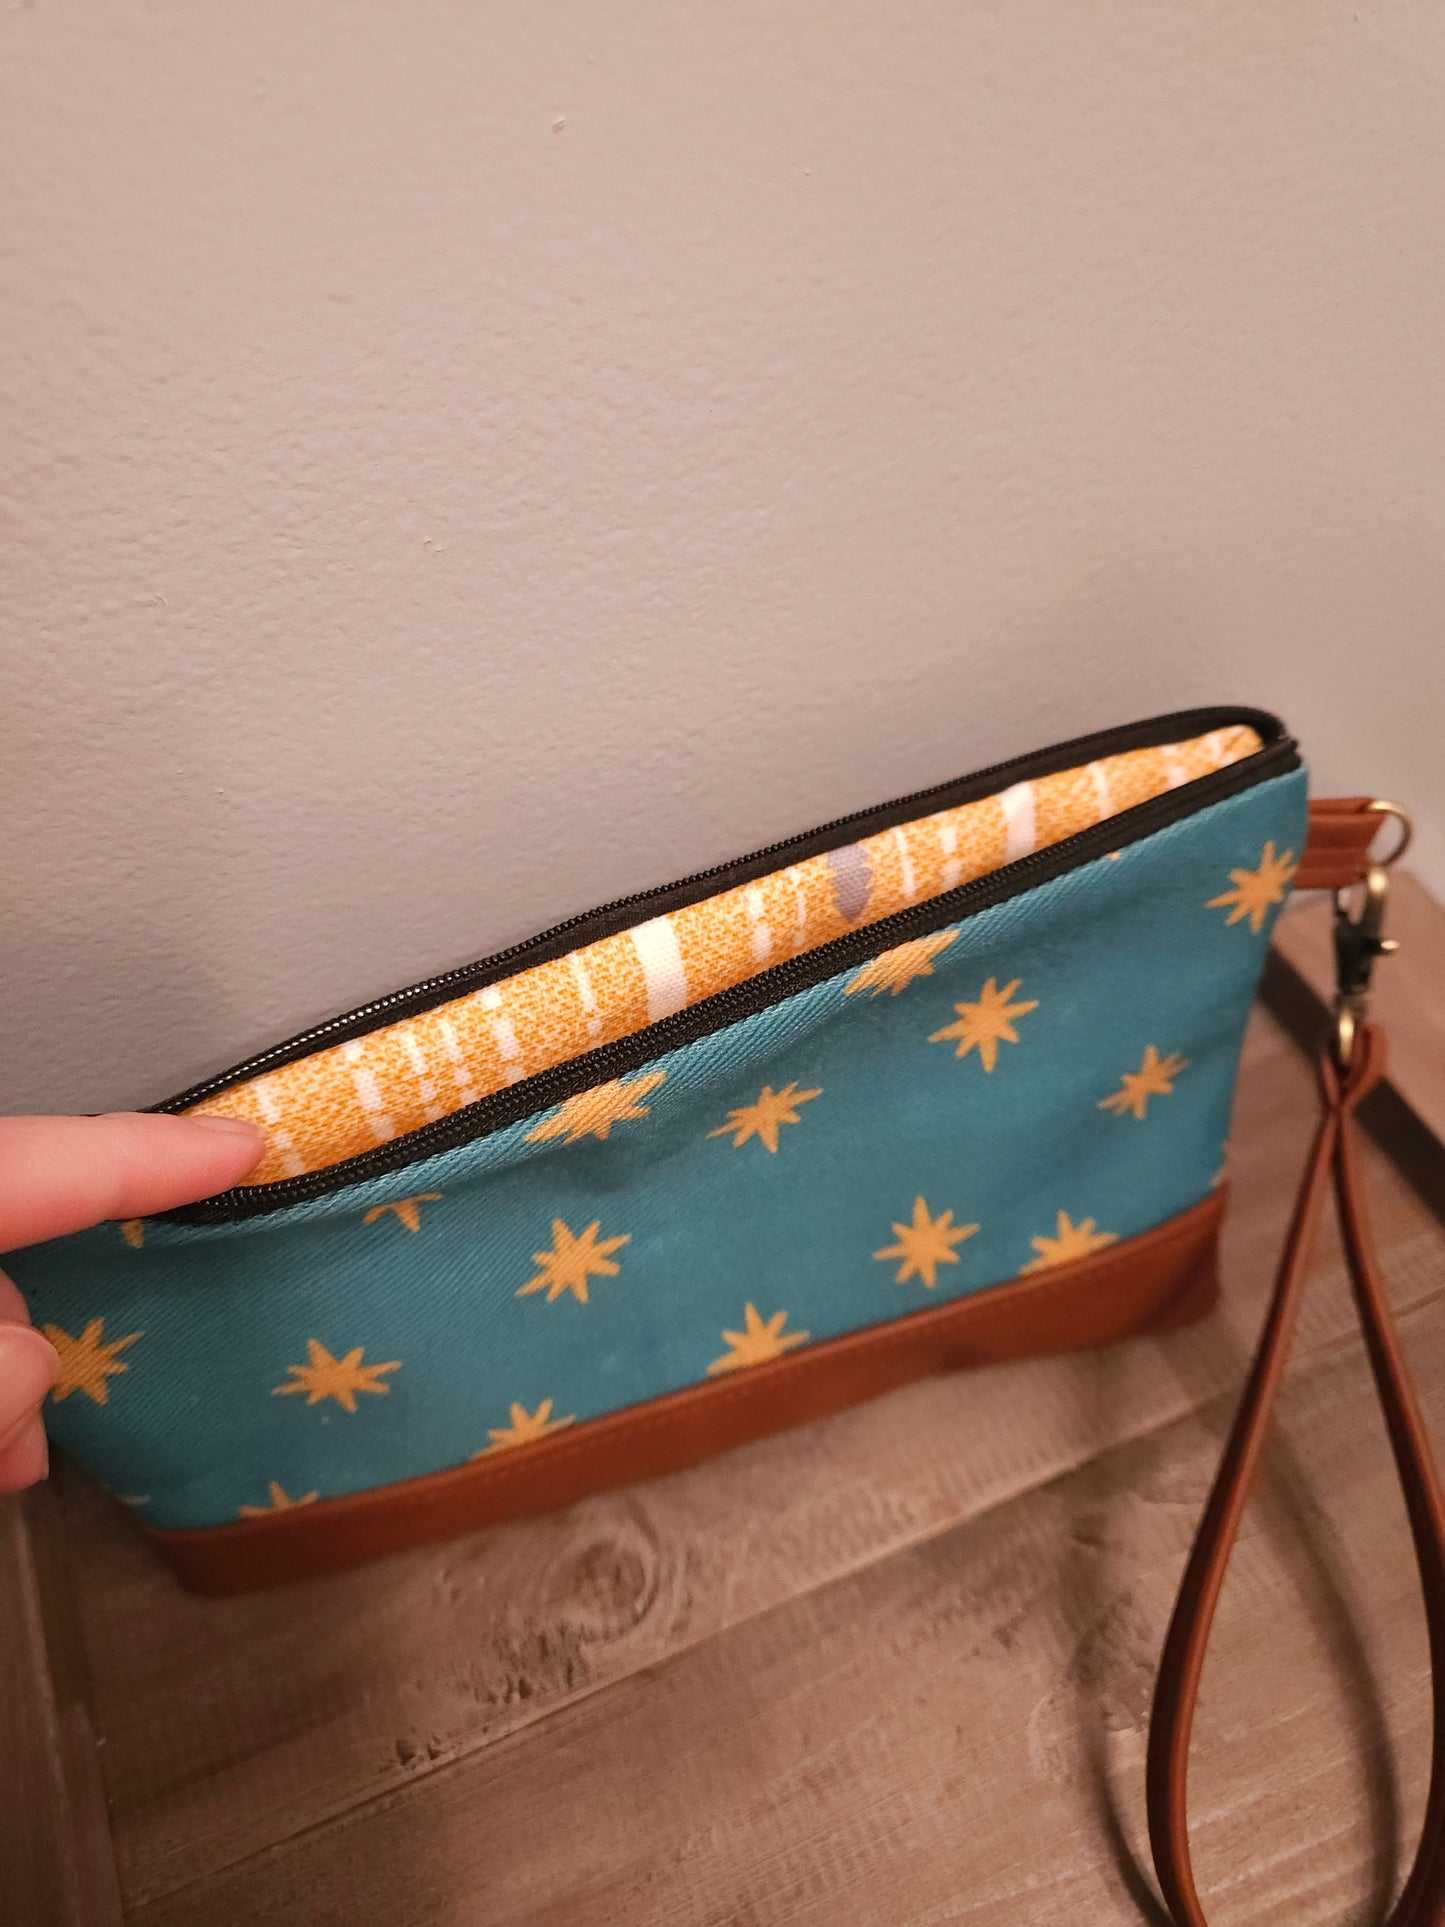 Our Lady of Guadalupe clutch with wristlet